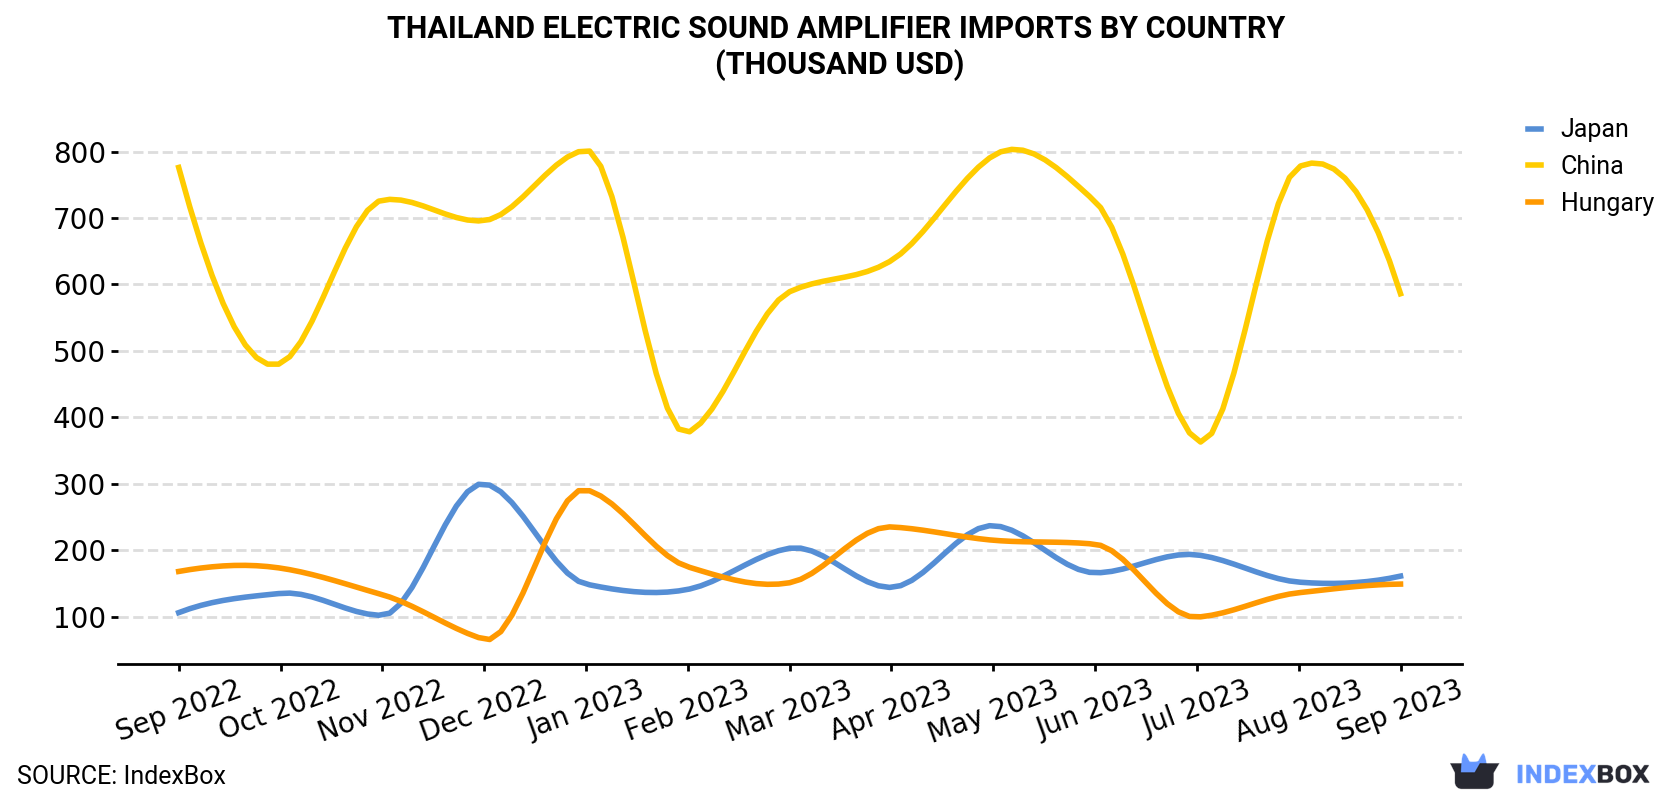 Thailand Electric Sound Amplifier Imports By Country (Thousand USD)